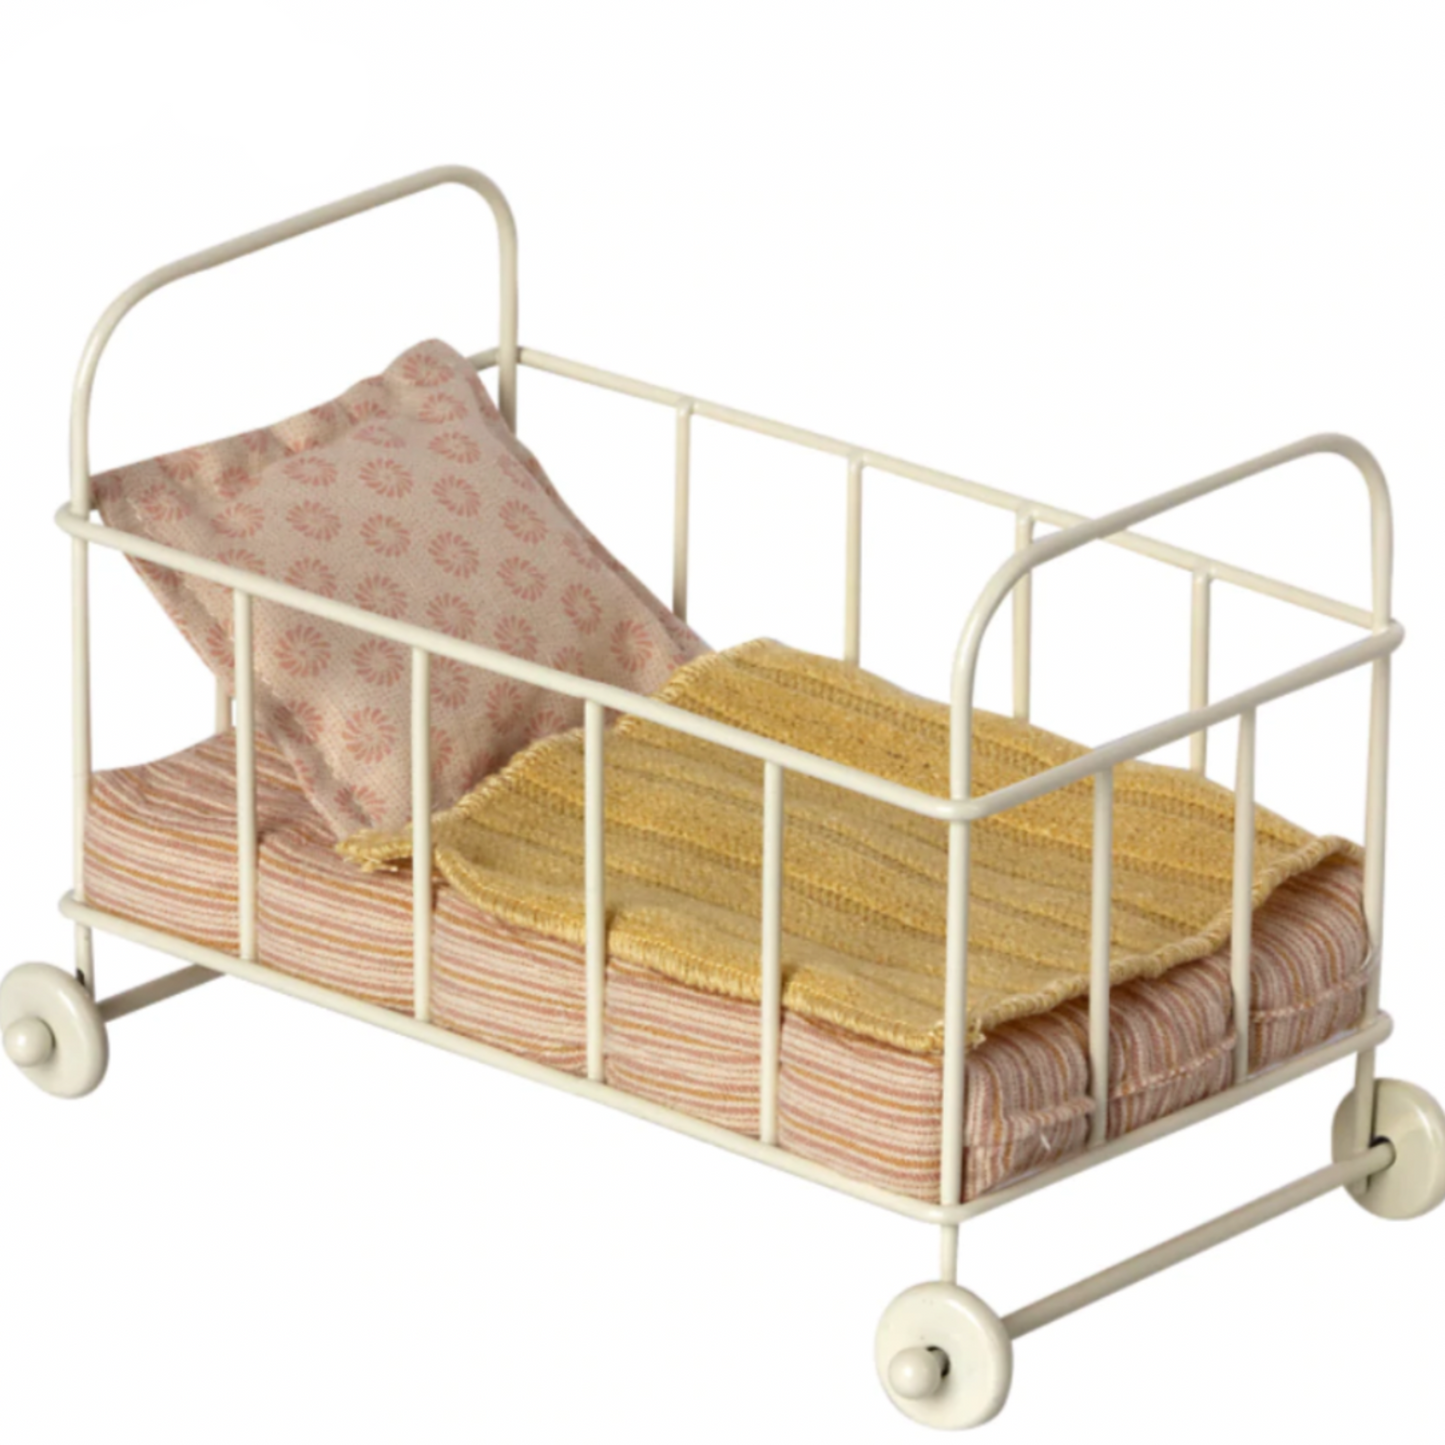 MAILEG Cot Bed Micro, Rose (6748652830785)